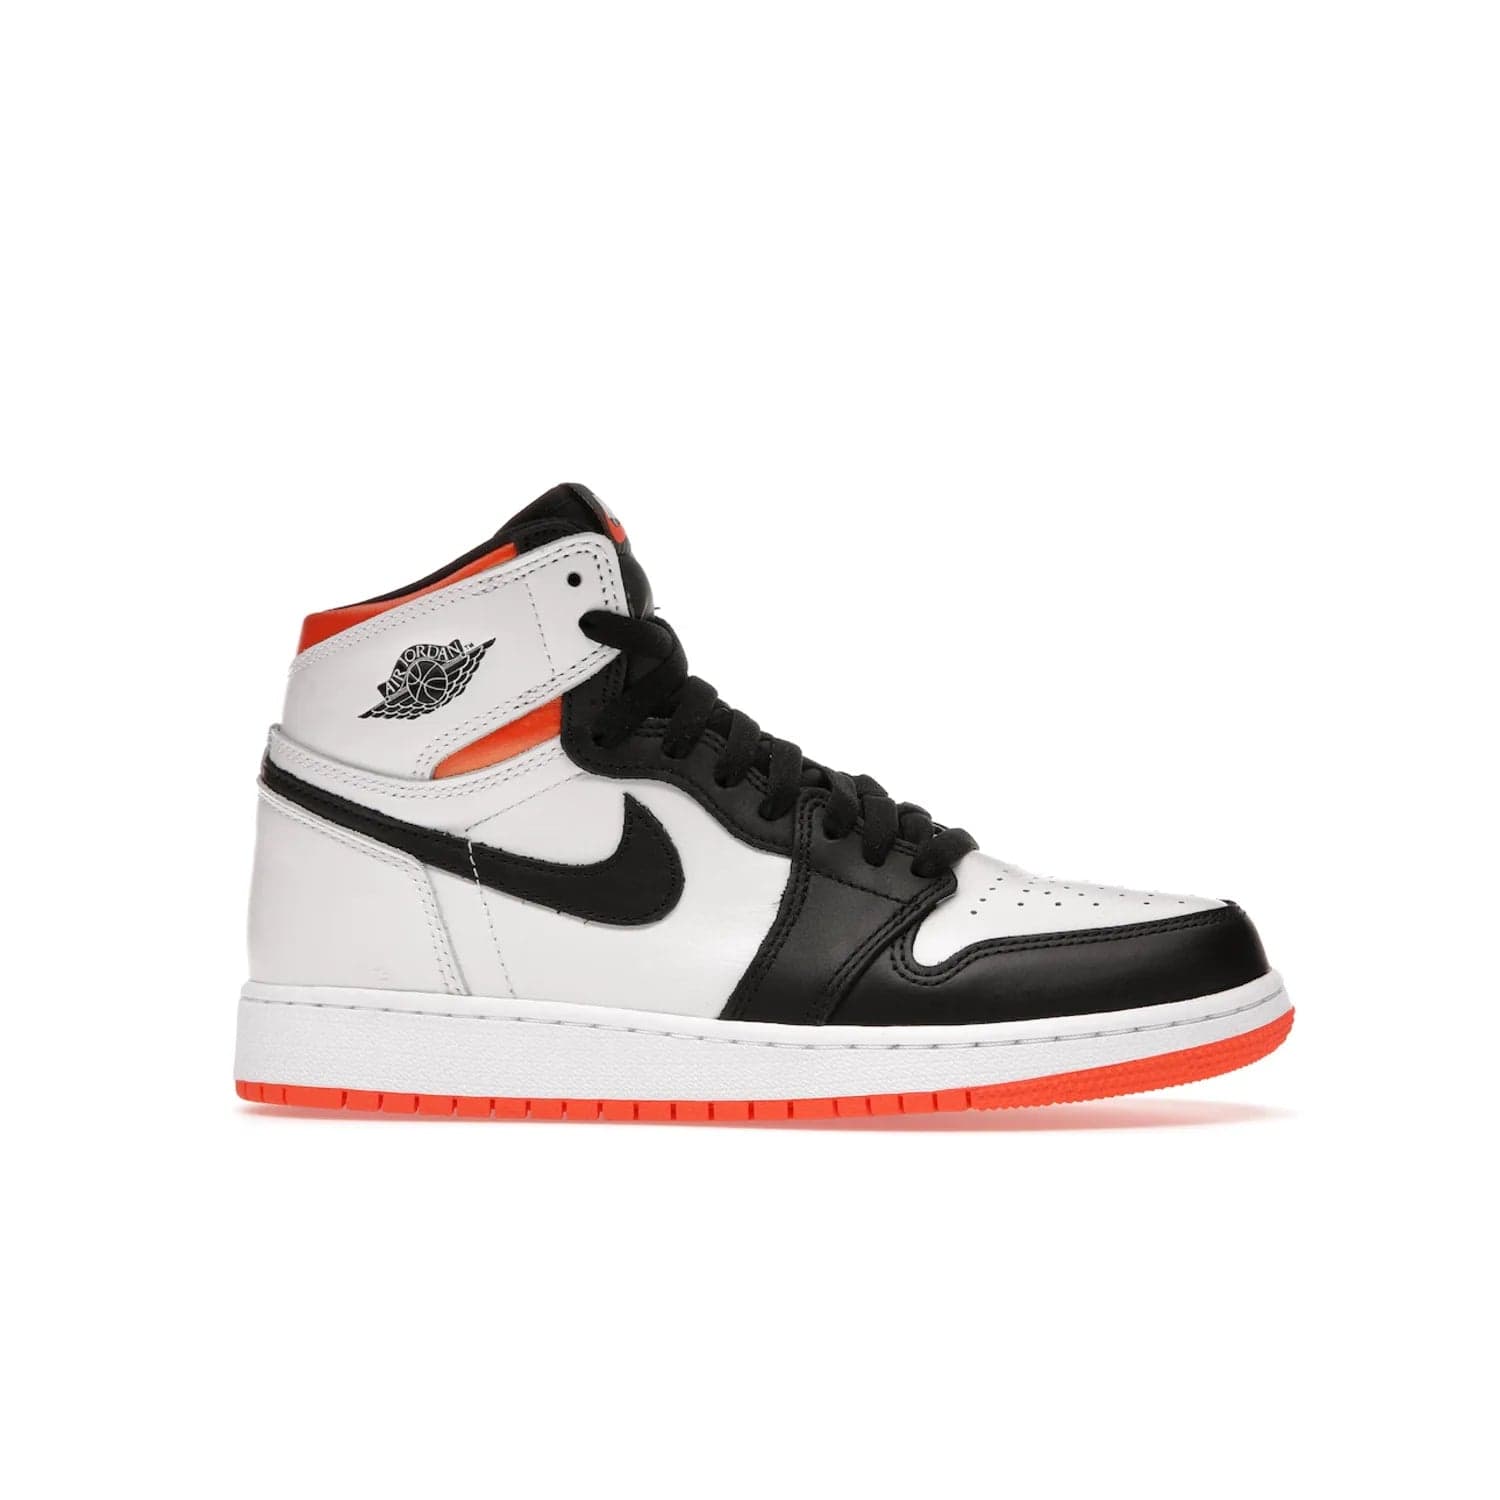 Jordan 1 High OG Electro Orange (GS) - Image 2 - Only at www.BallersClubKickz.com - The Air Jordan 1 High OG Electro Orange GS is the ideal shoe for kids on the go. Featuring white leather uppers, black overlays, and bright orange accents, it's sure to become a favorite. A great mix of classic style and vibrant colors, the shoe delivers air cushioning for comfort and hard orange rubber for grip. Release on July 17th, 2021. Get them a pair today.